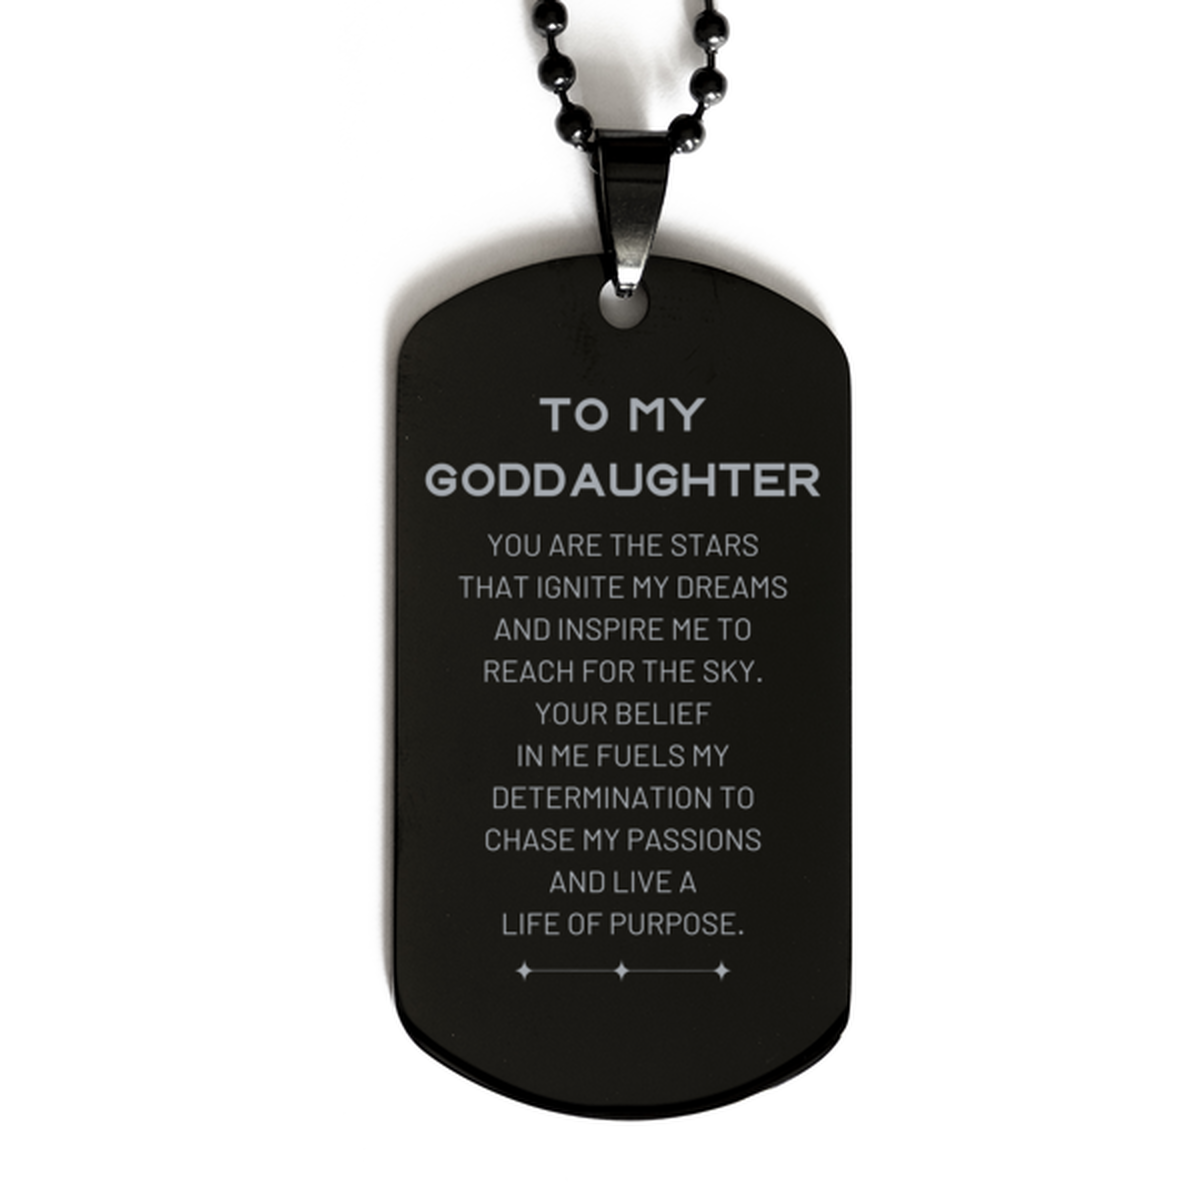 To My Goddaughter Black Dog Tag, You are the stars that ignite my dreams and inspire me to reach for the sky, Birthday Unique Gifts For Goddaughter, Thank You Gifts For Goddaughter